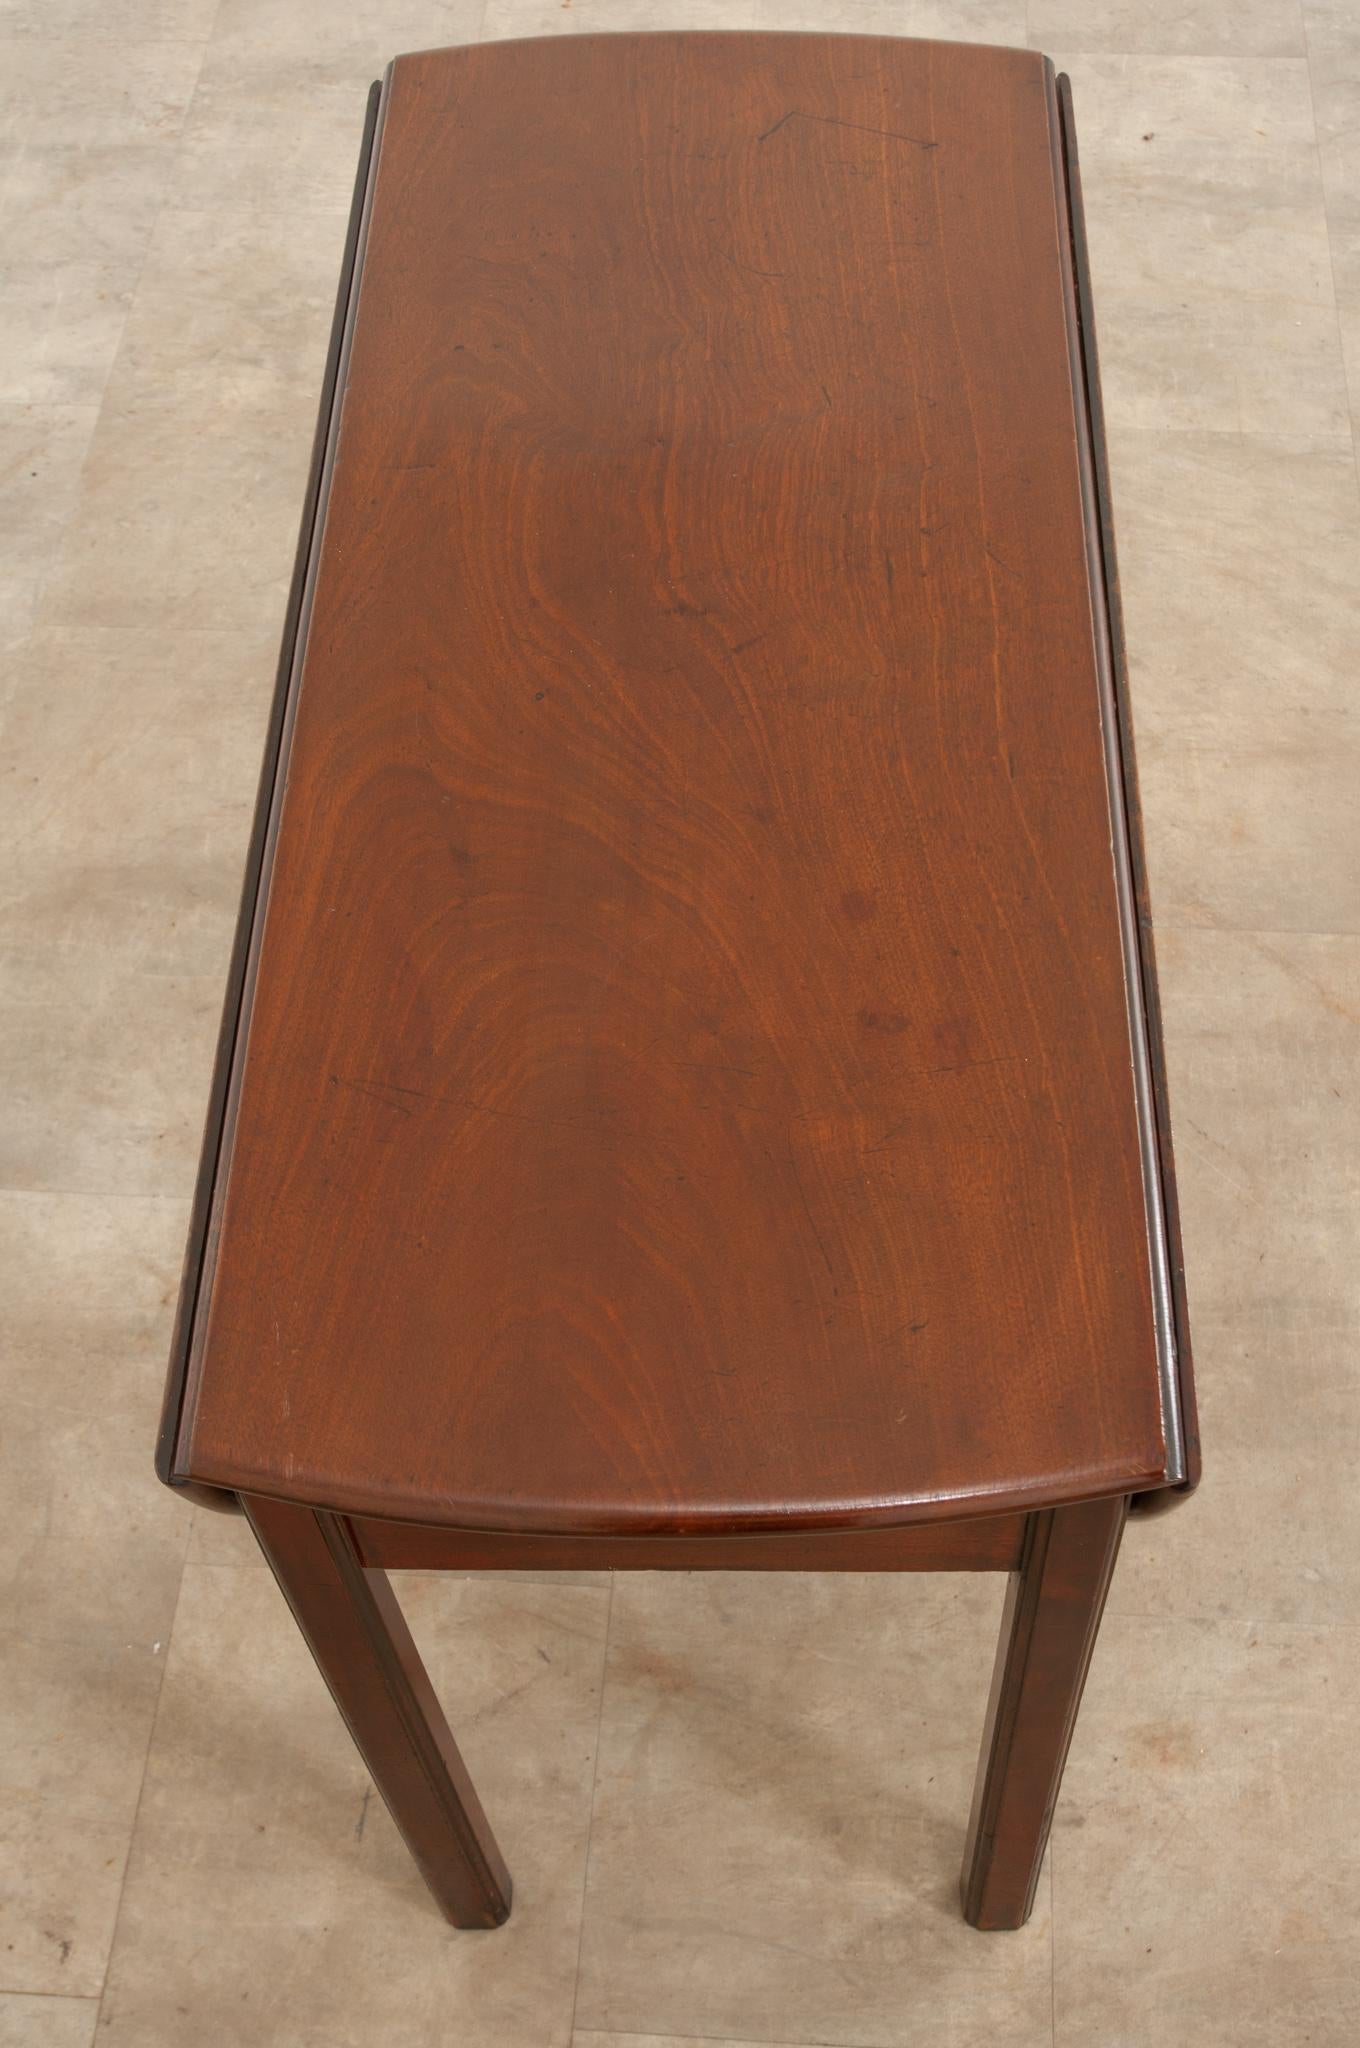 A fantastic English mahogany drop leaf table, made there circa 1840. The table has two large, demilune-shaped leaves that lay to the sides of the table when down. To expand the top and raise the leaves, the leaves are lifted, and the apron itself is